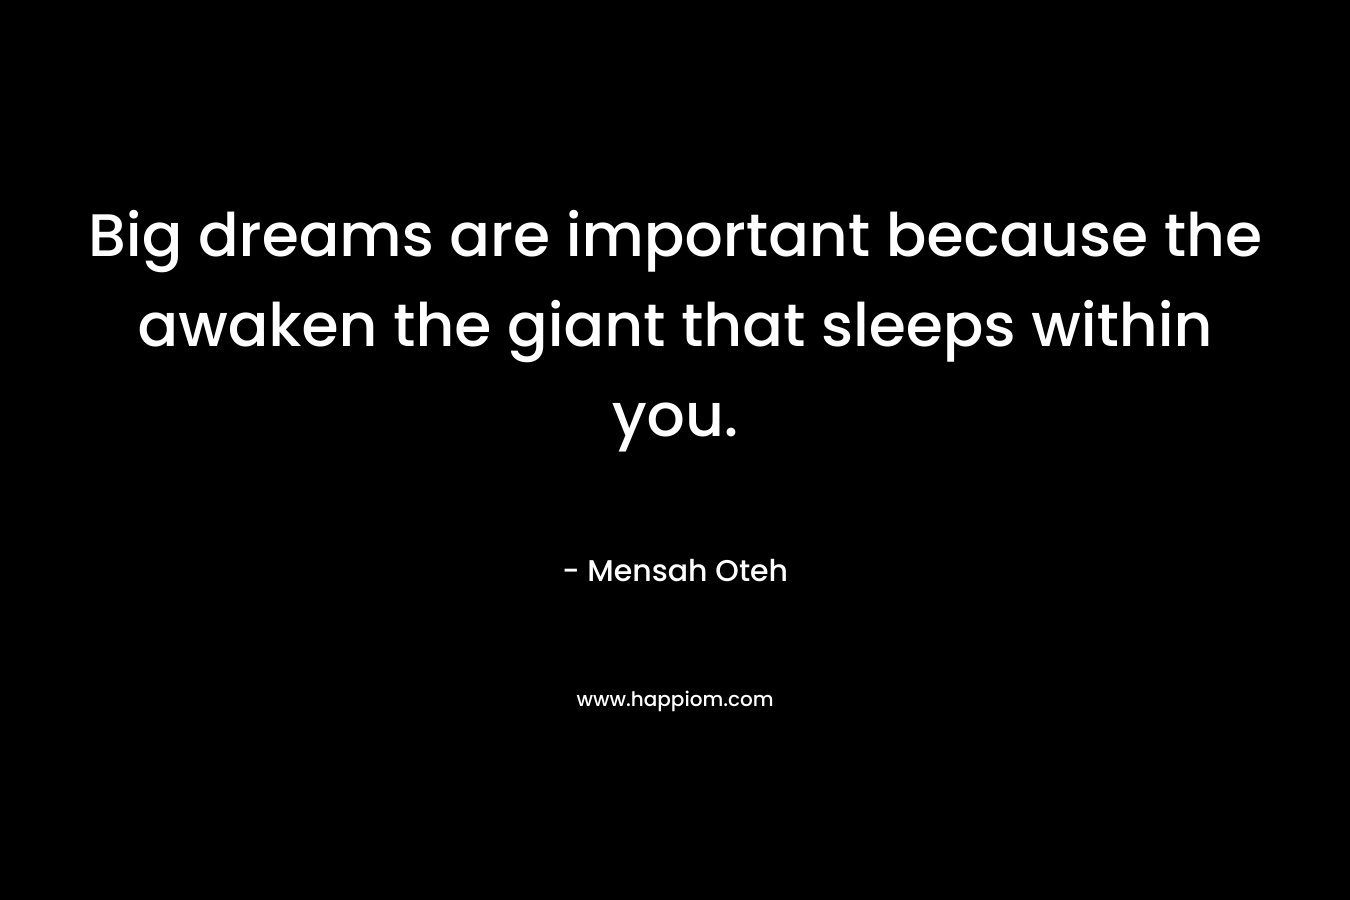 Big dreams are important because the awaken the giant that sleeps within you. – Mensah Oteh